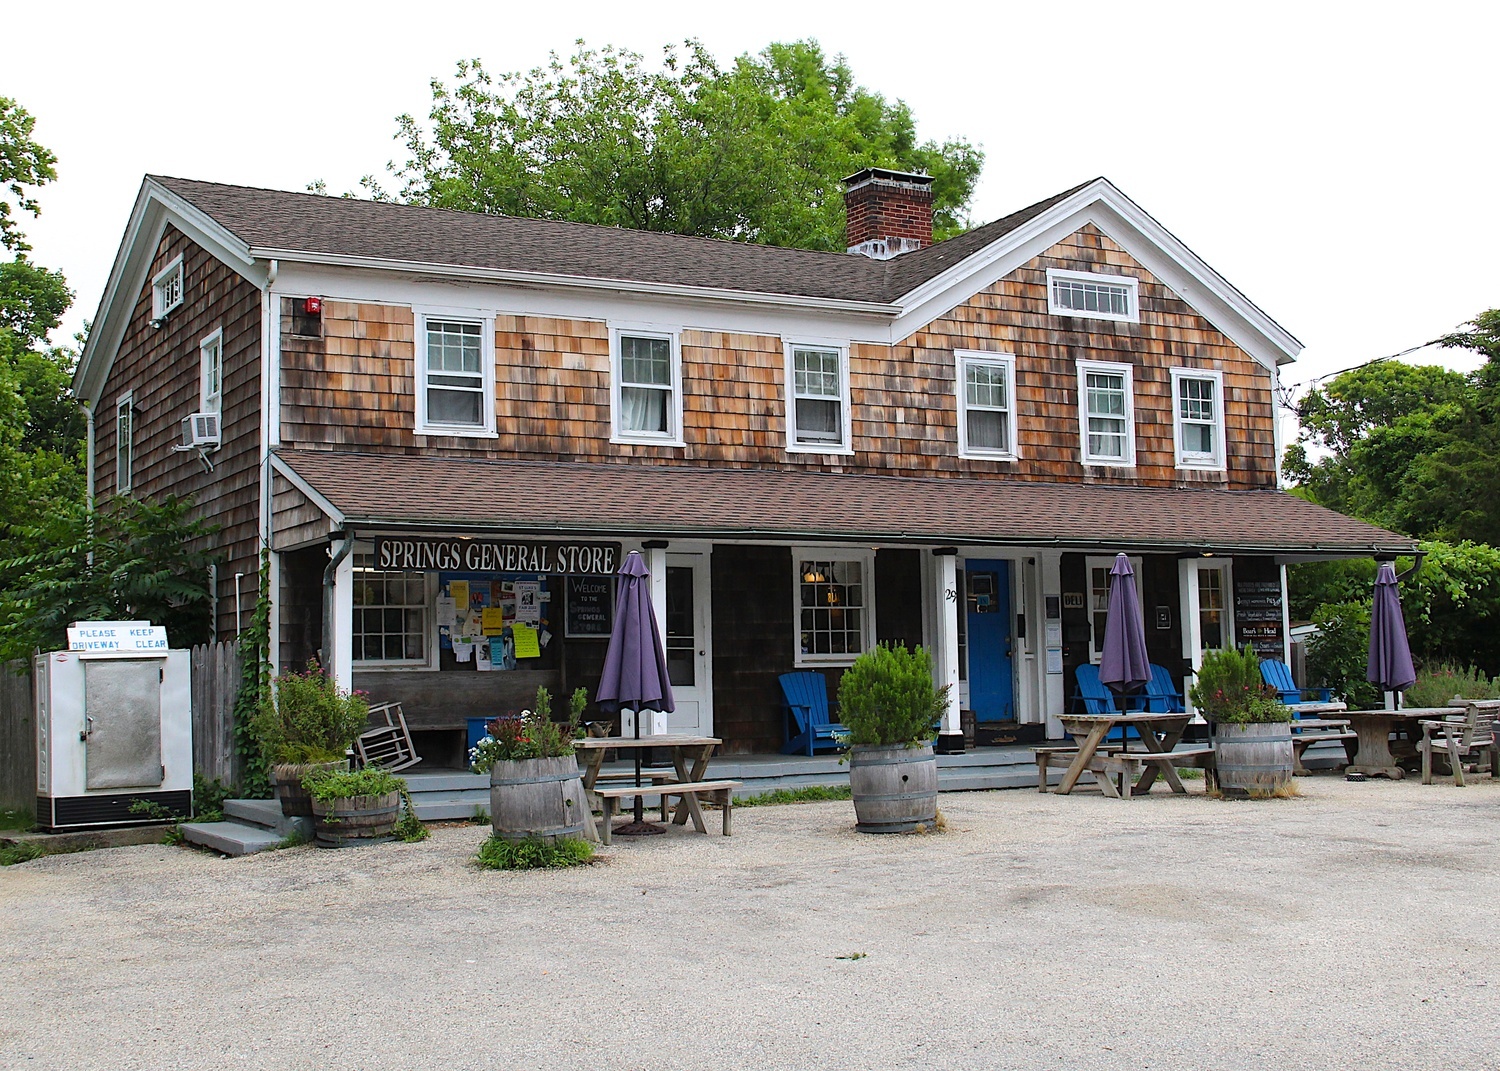 The Springs General Store will remain shuttered this summer as its new owners seek out permits to do renovations. But when it returns, so will breakfast, one of the owners said this week seeking to dispell a misconception that the buisness would not open until 11 a.m. KYRIL BROMLEY